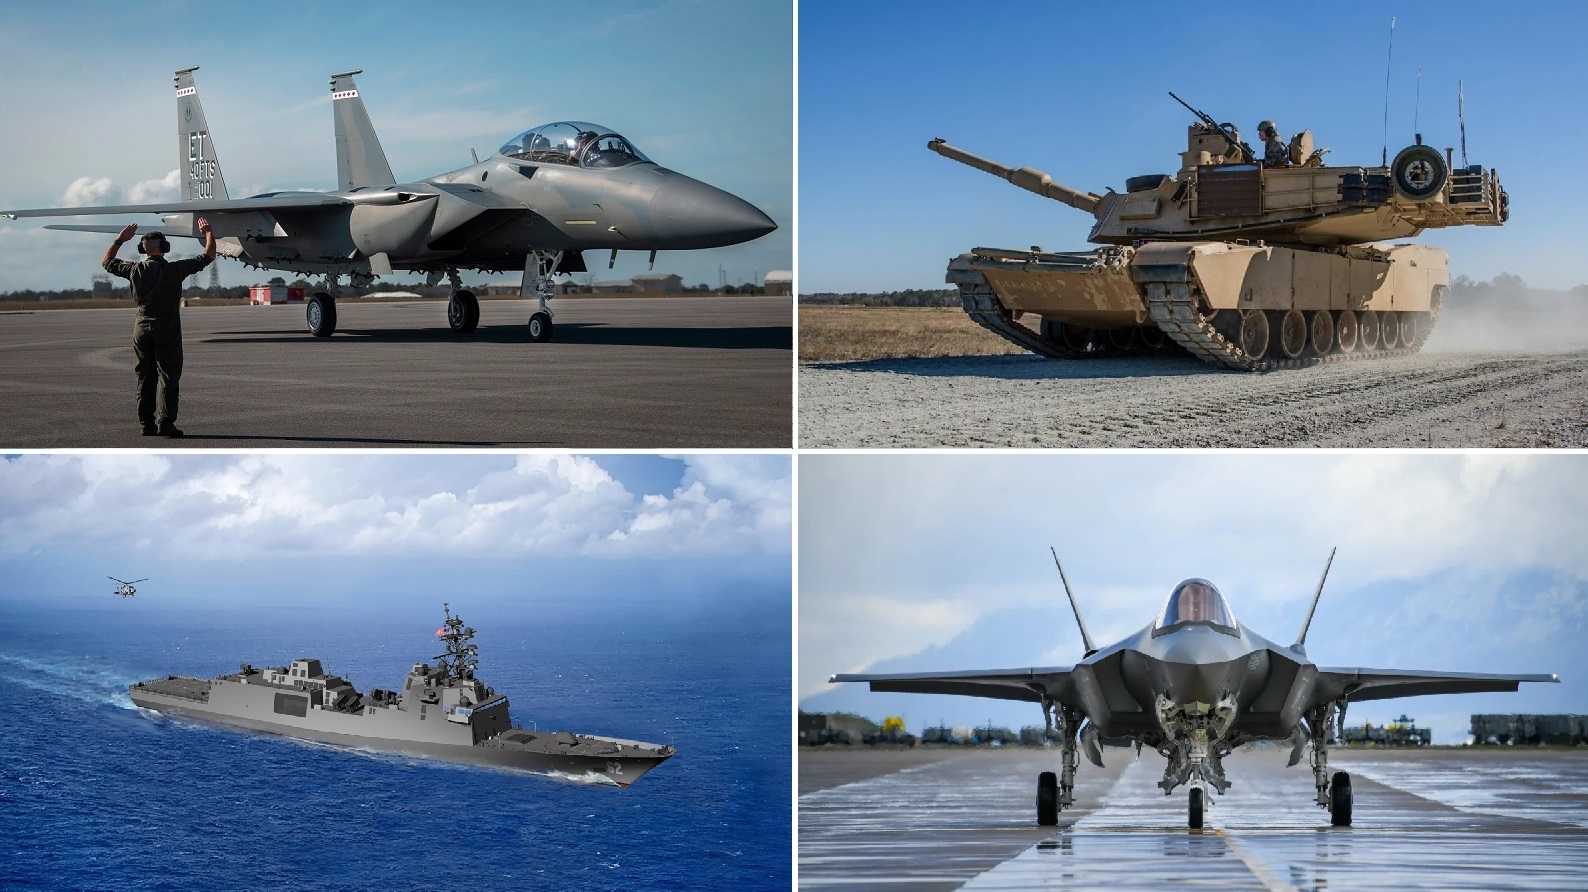 8 hypersonic missiles, 48 F-35 Lightning II fighters, 24 upgraded F-15EX Eagle II, ships, tanks, submarines and destroyers - the US will boost its defence capability by billions of dollars